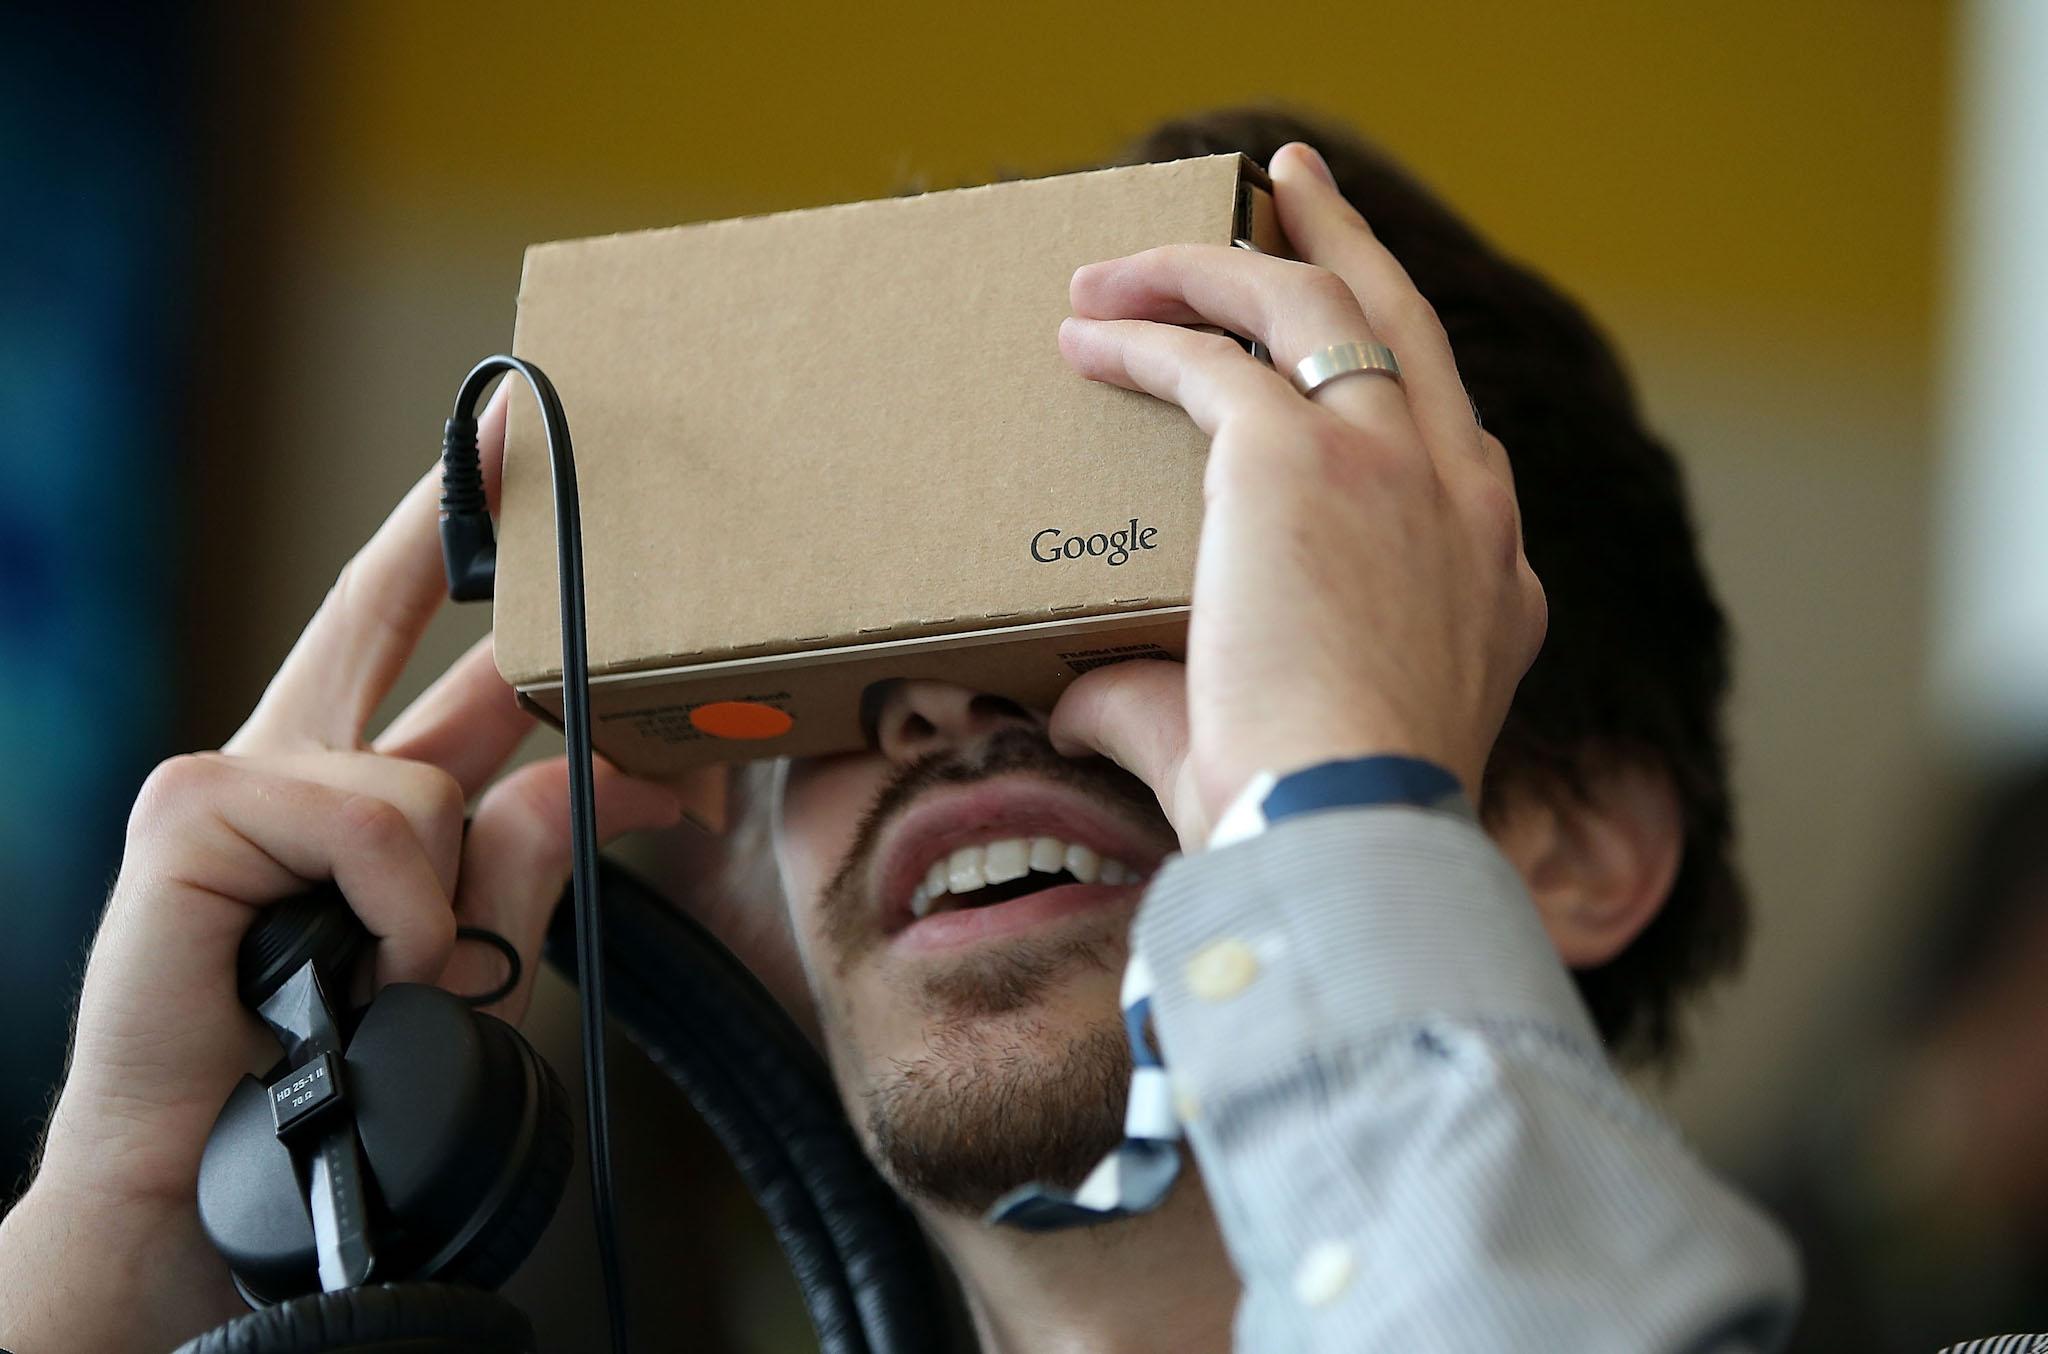 An attendee inspects Google Cardboard during the 2015 Google I/O conference on May 28, 2015 in San Francisco